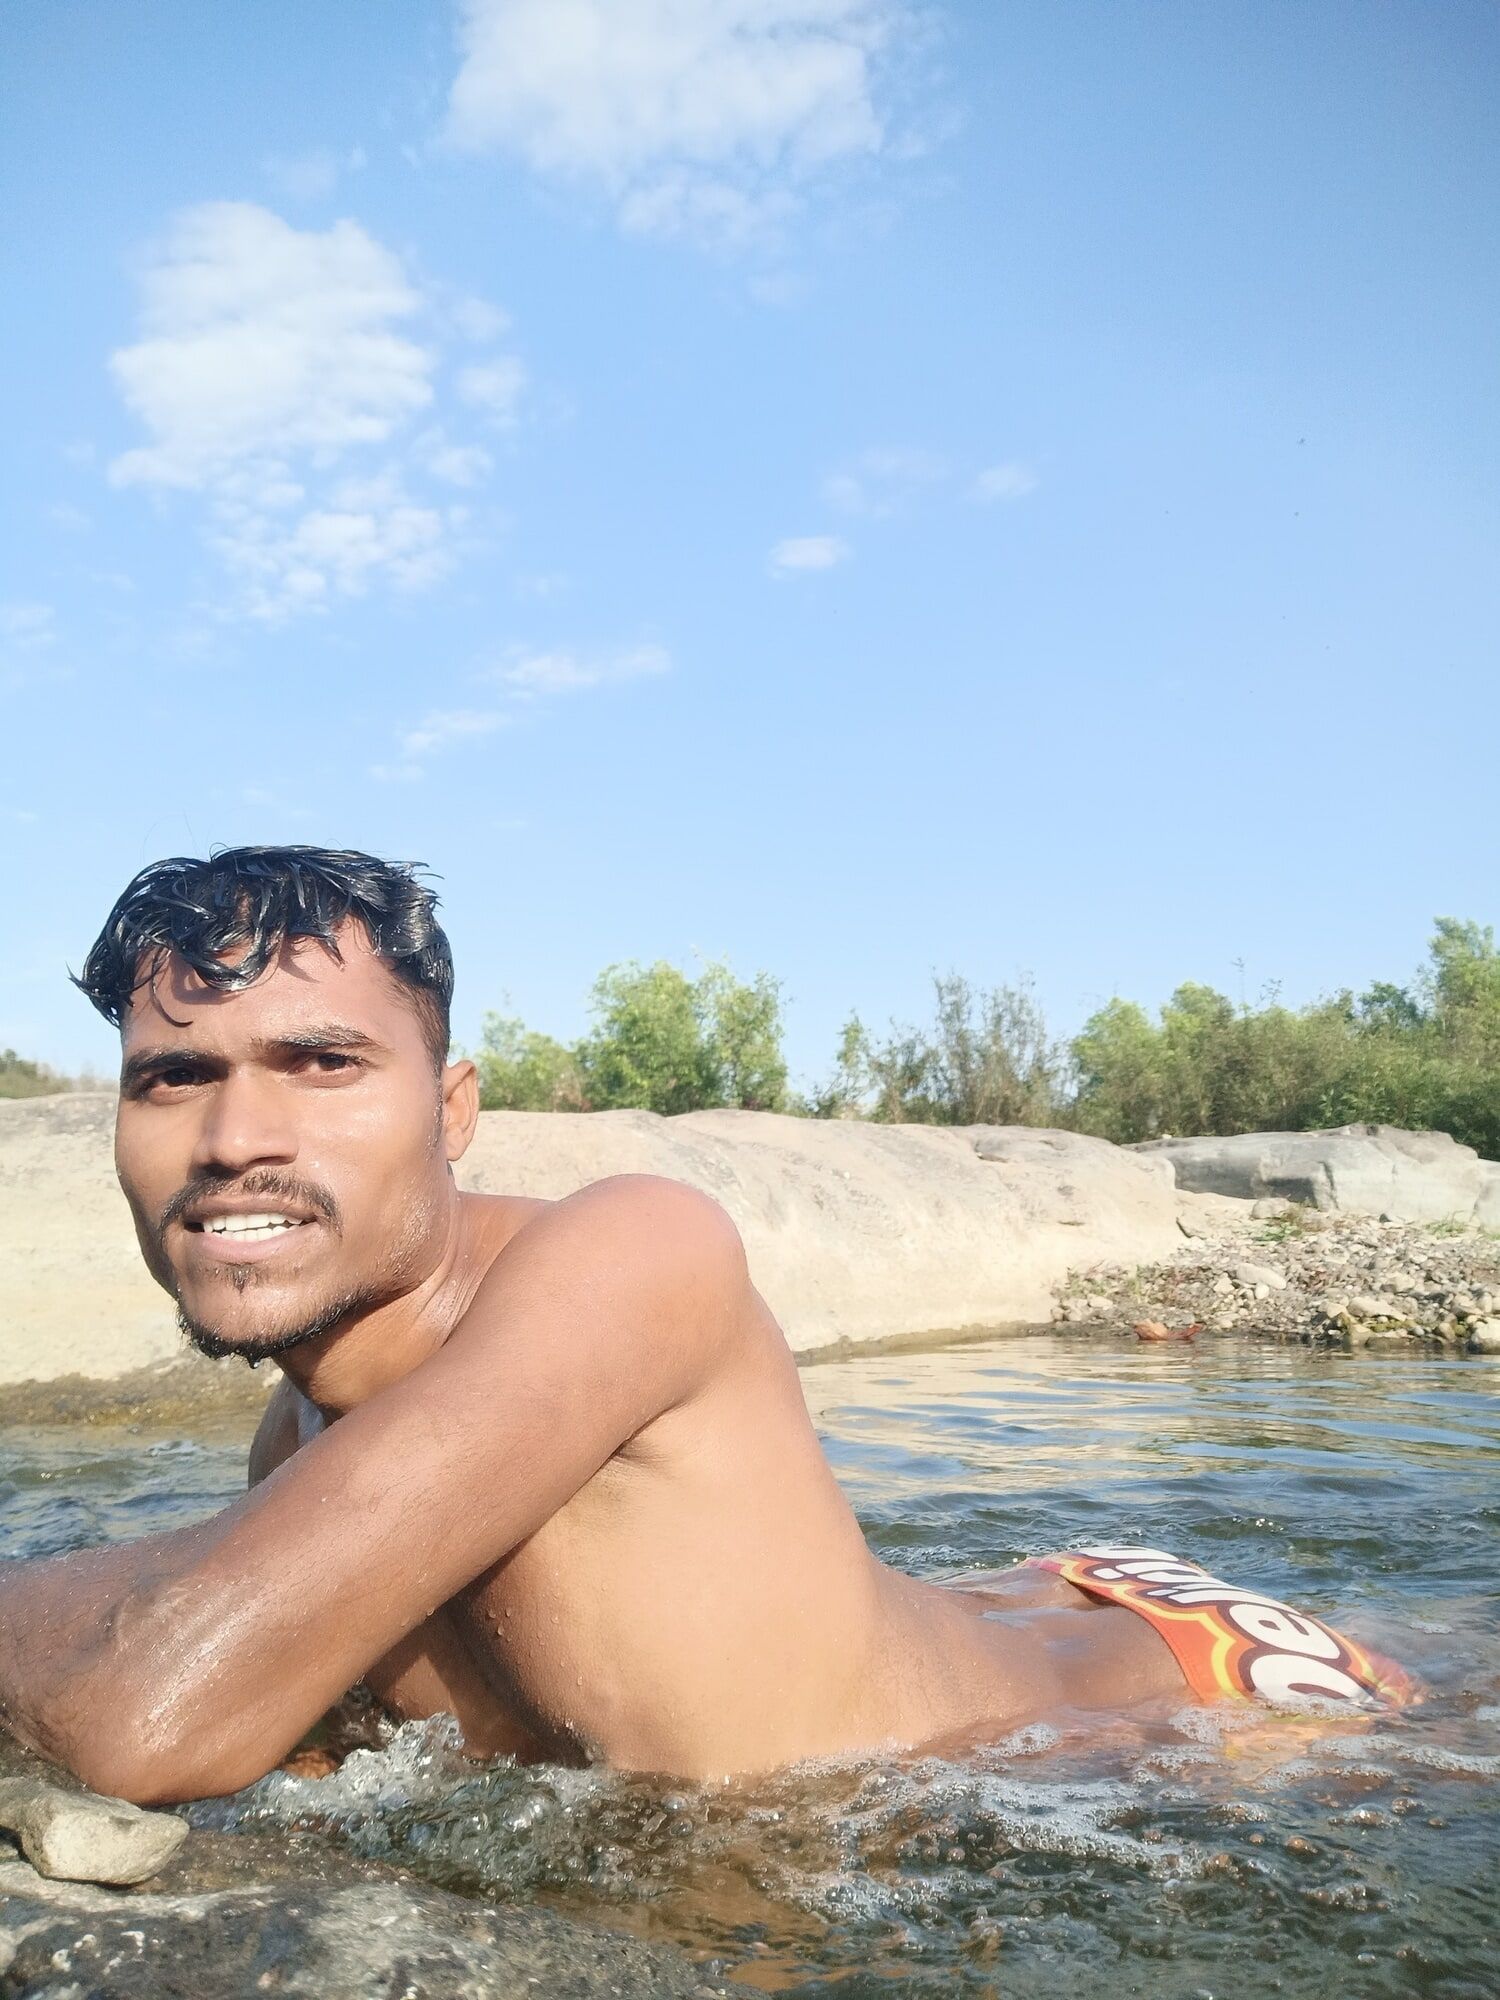 Sanju gamit on river advanture hot and sexy looking in man 